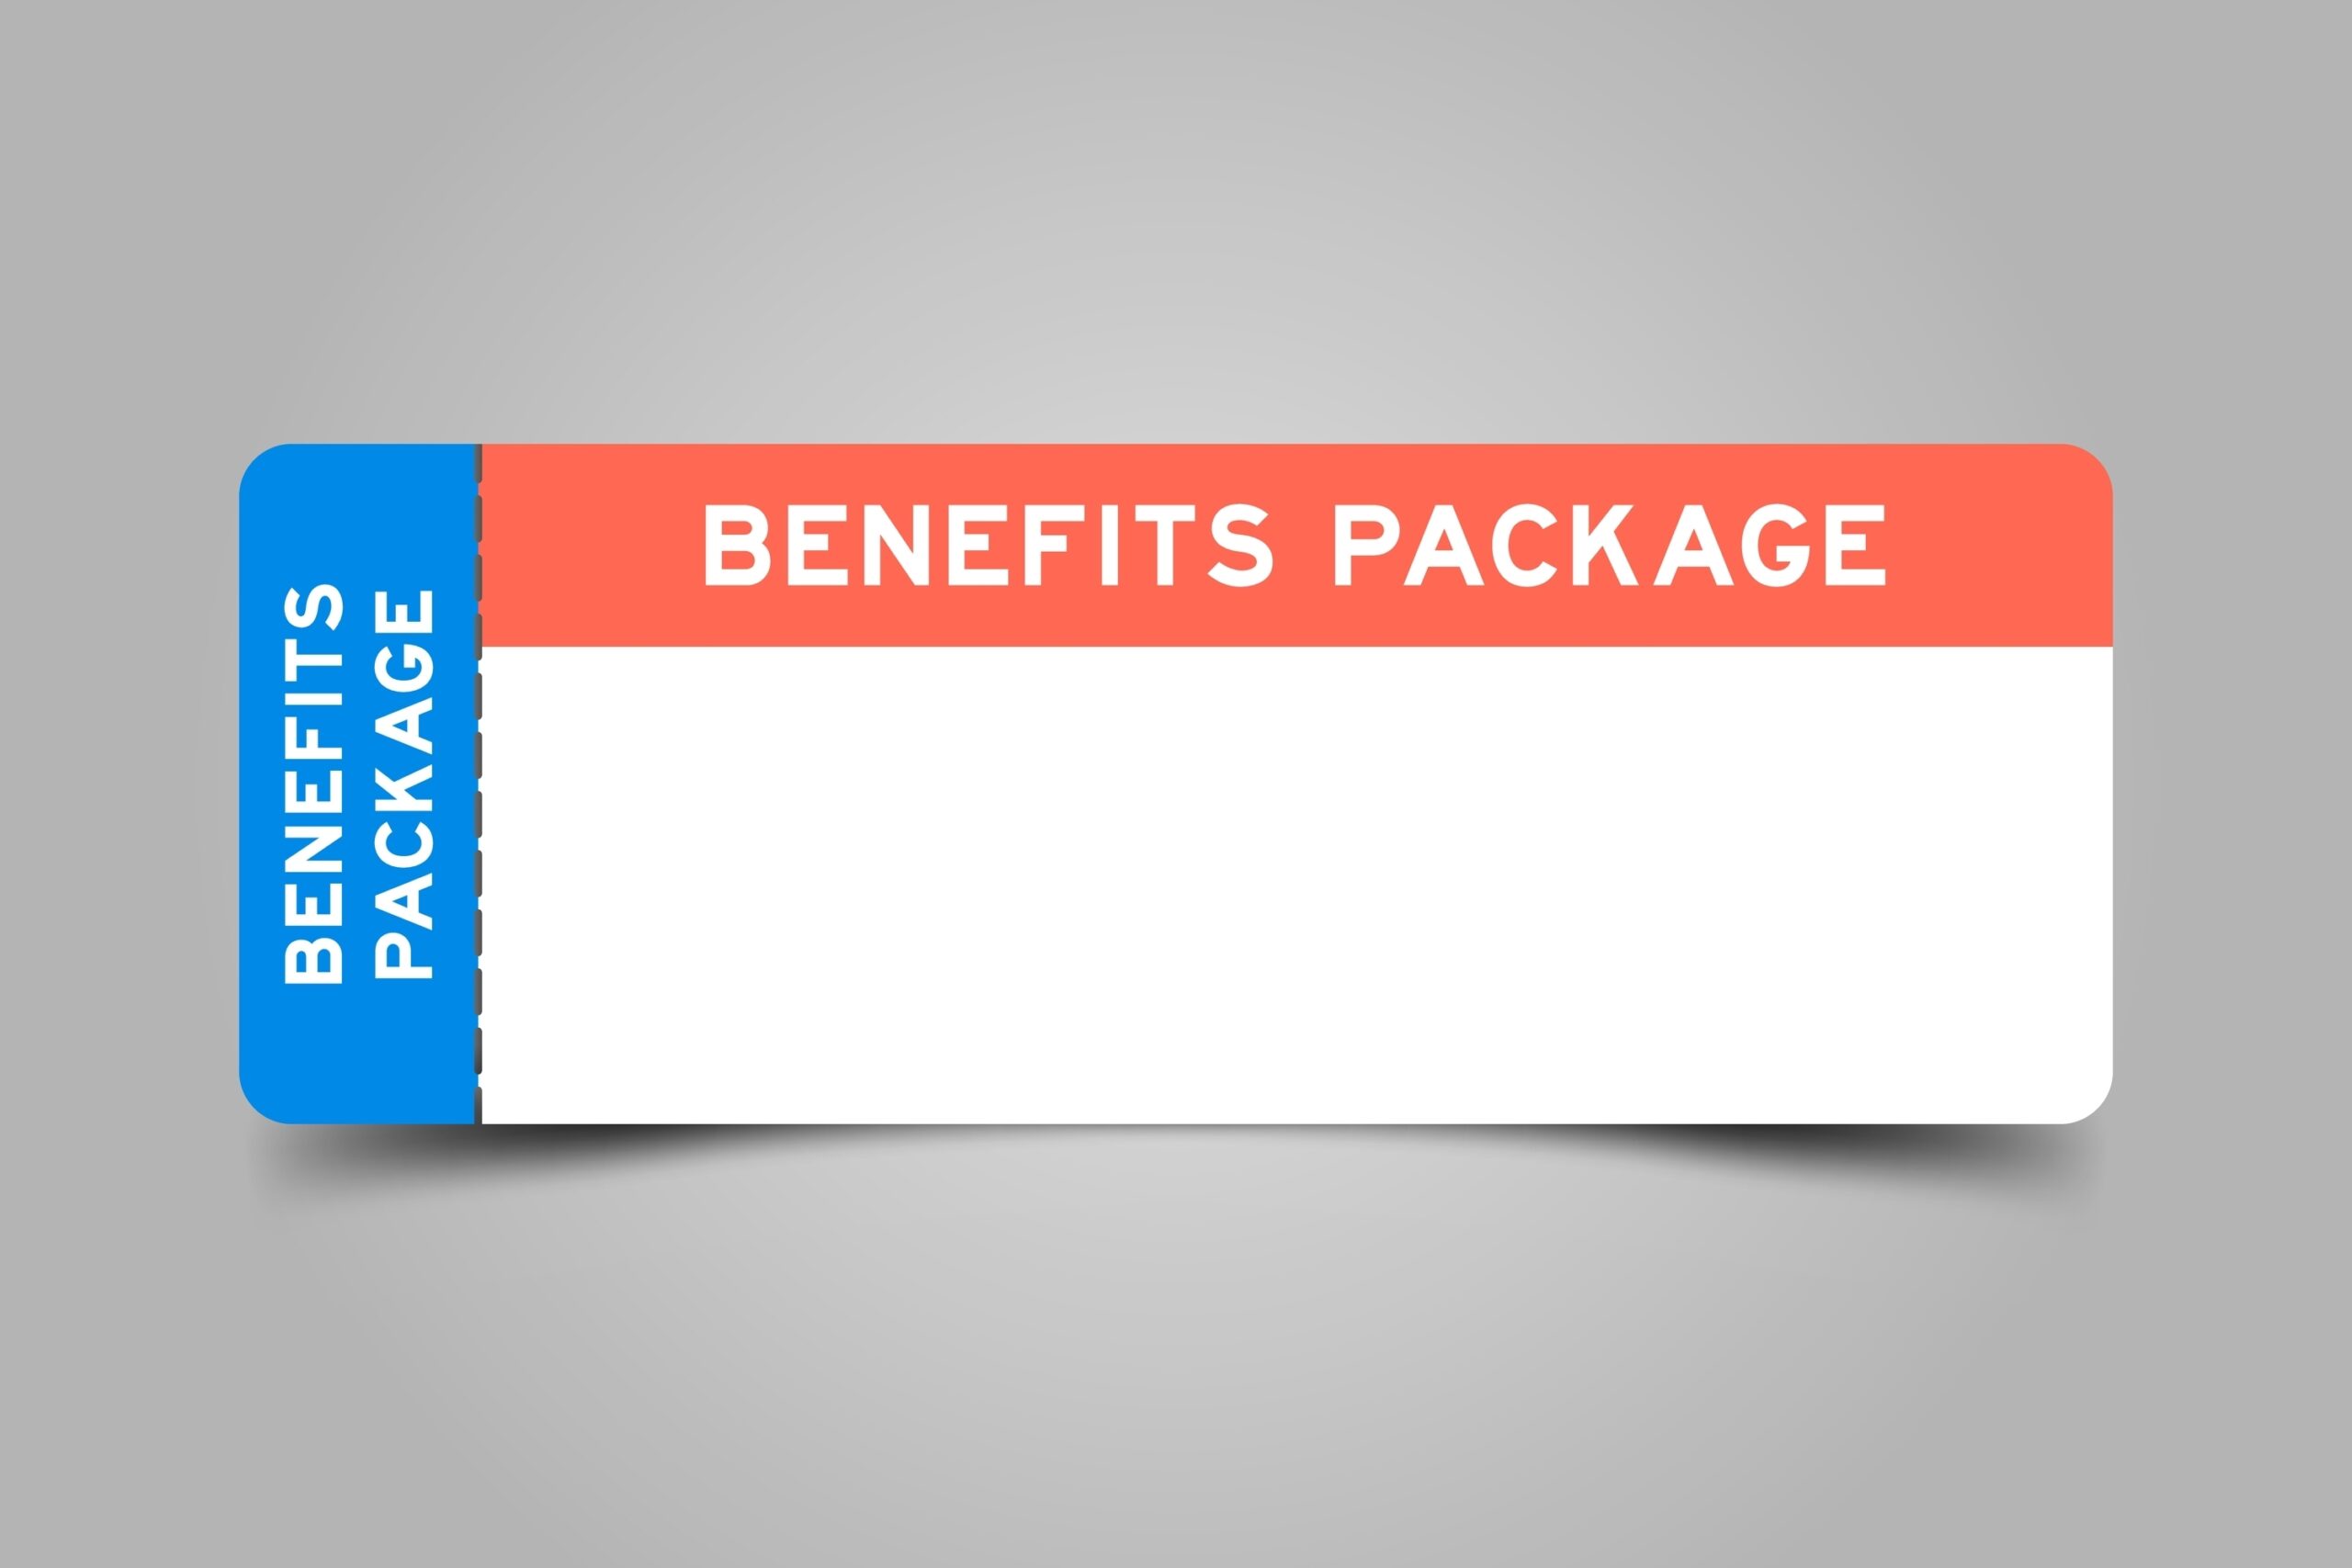 What is included in a full benefits package?